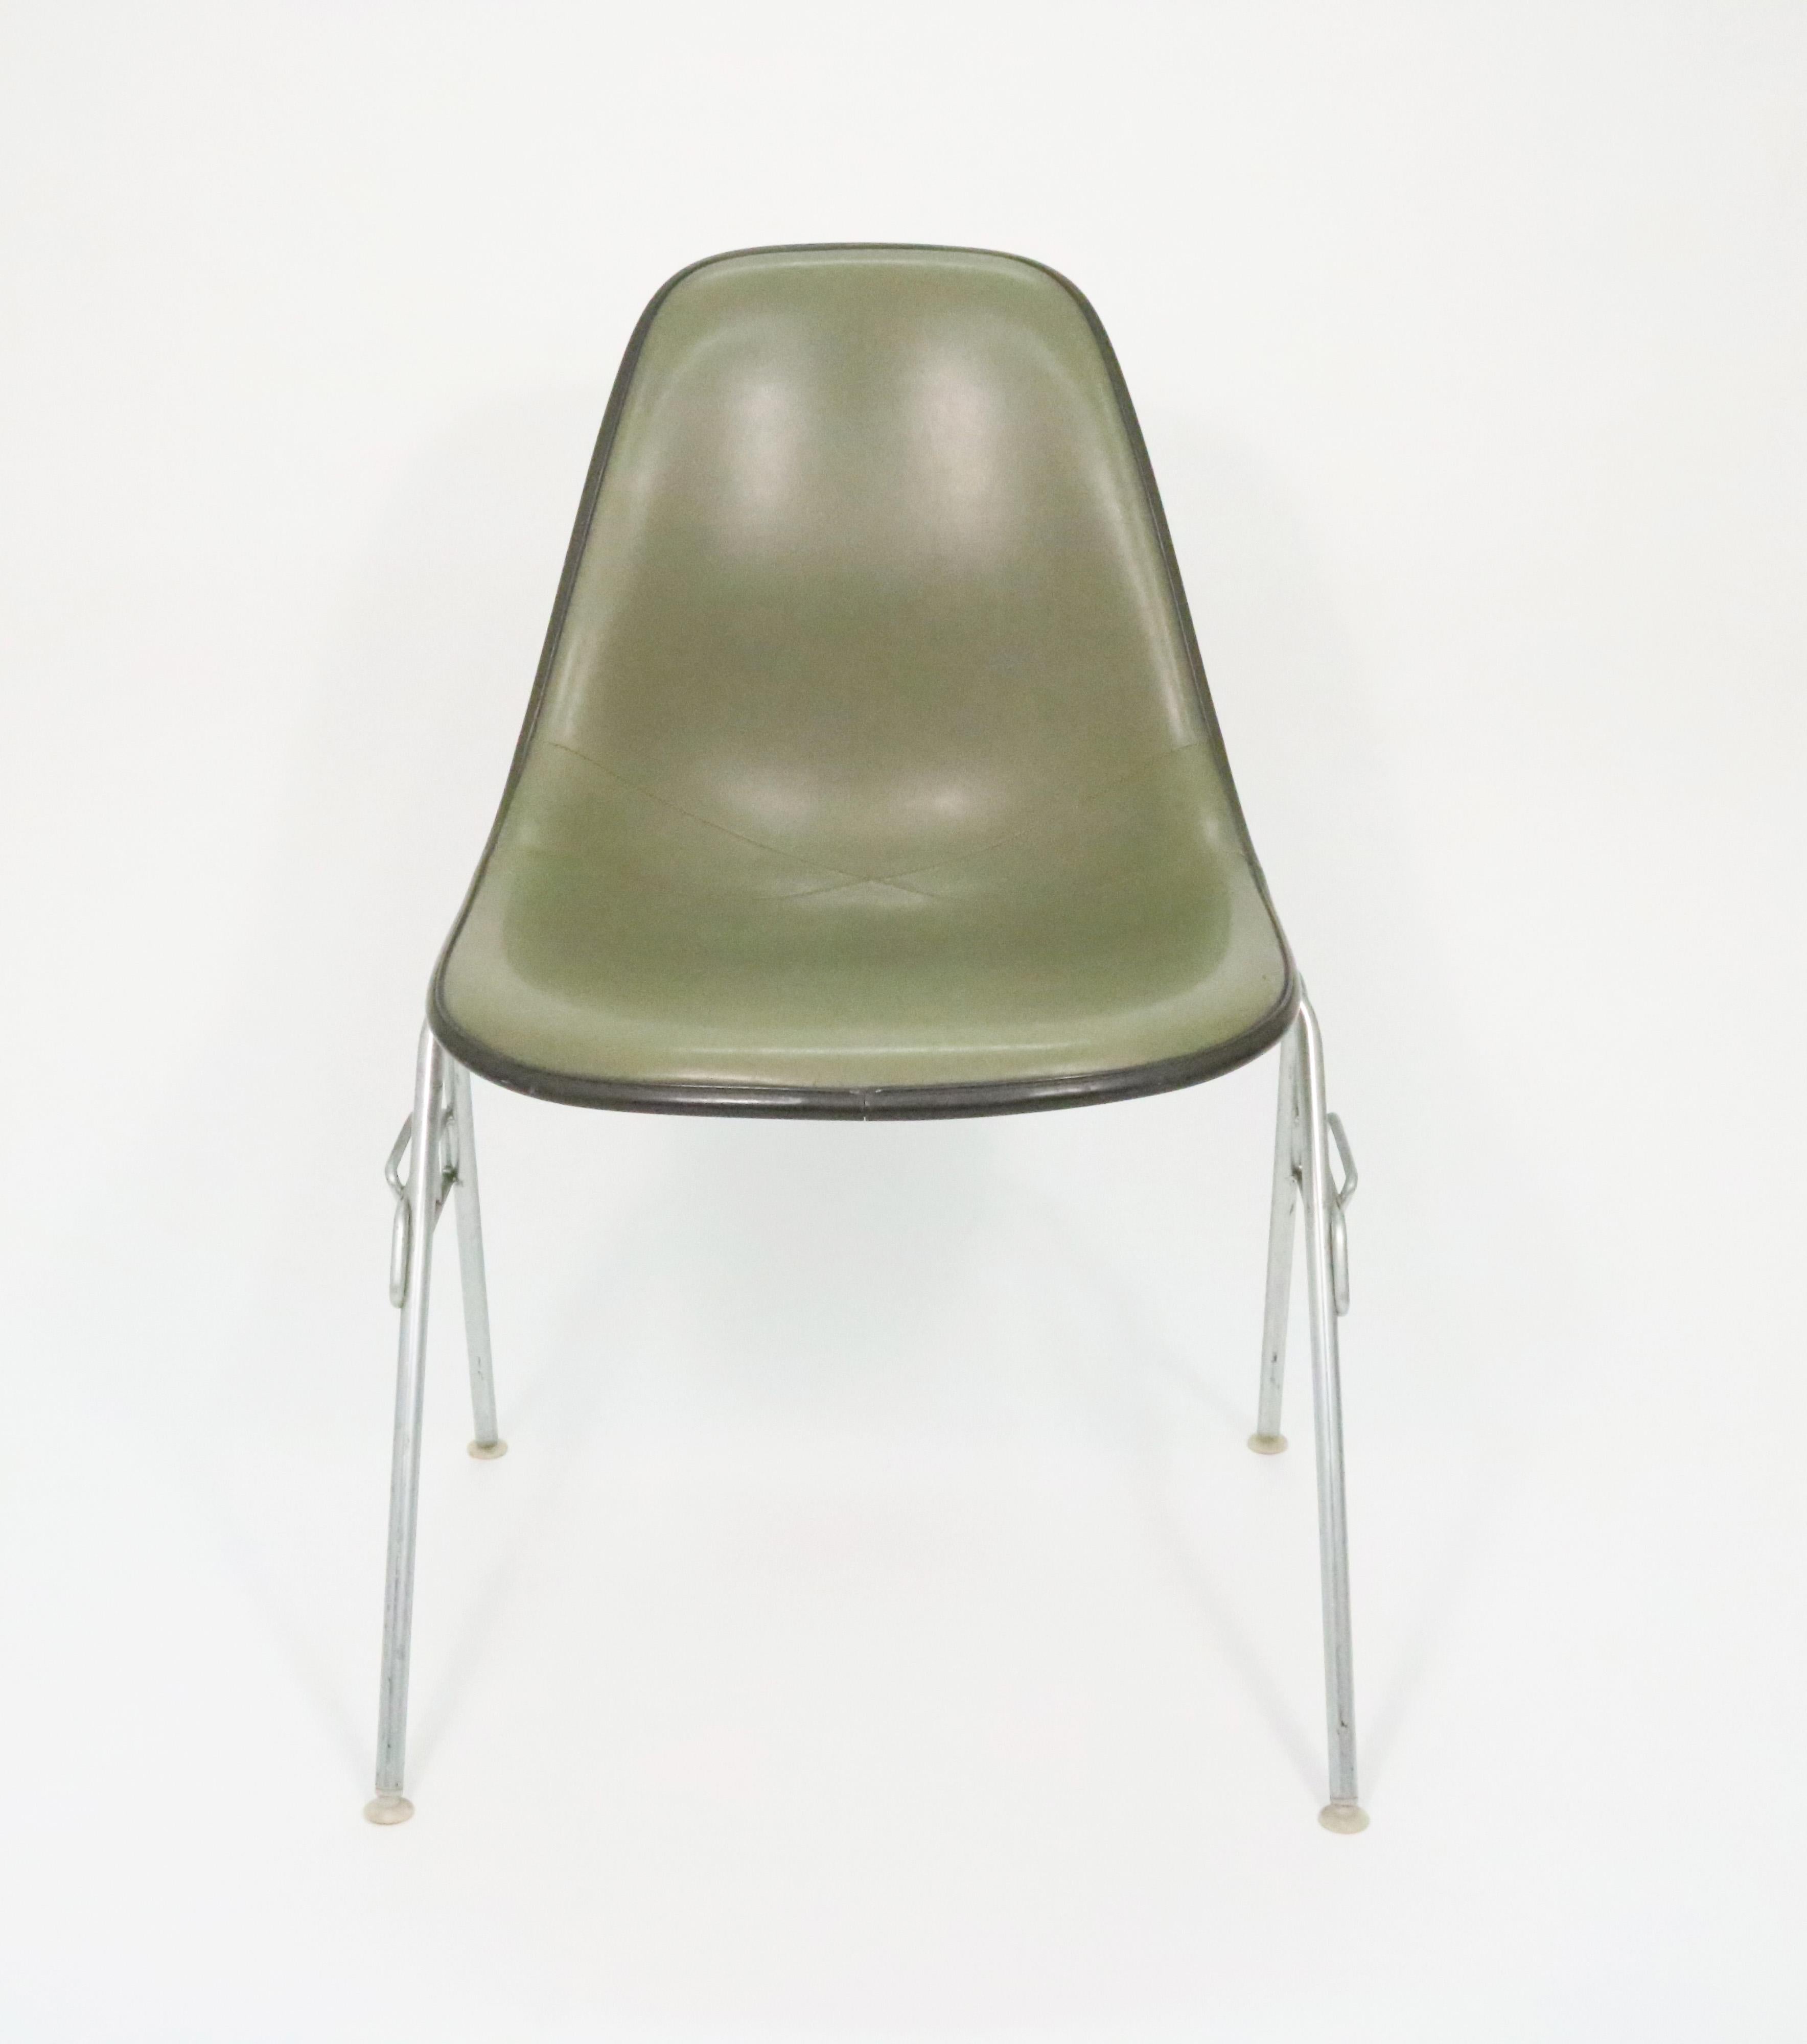 Charles and Ray Eames' molded fiberglass side chair upholstered in green vinyl with original DSS stackable cast aluminum base.

Herman Miller name and logo, as well as patents tag on the underside.